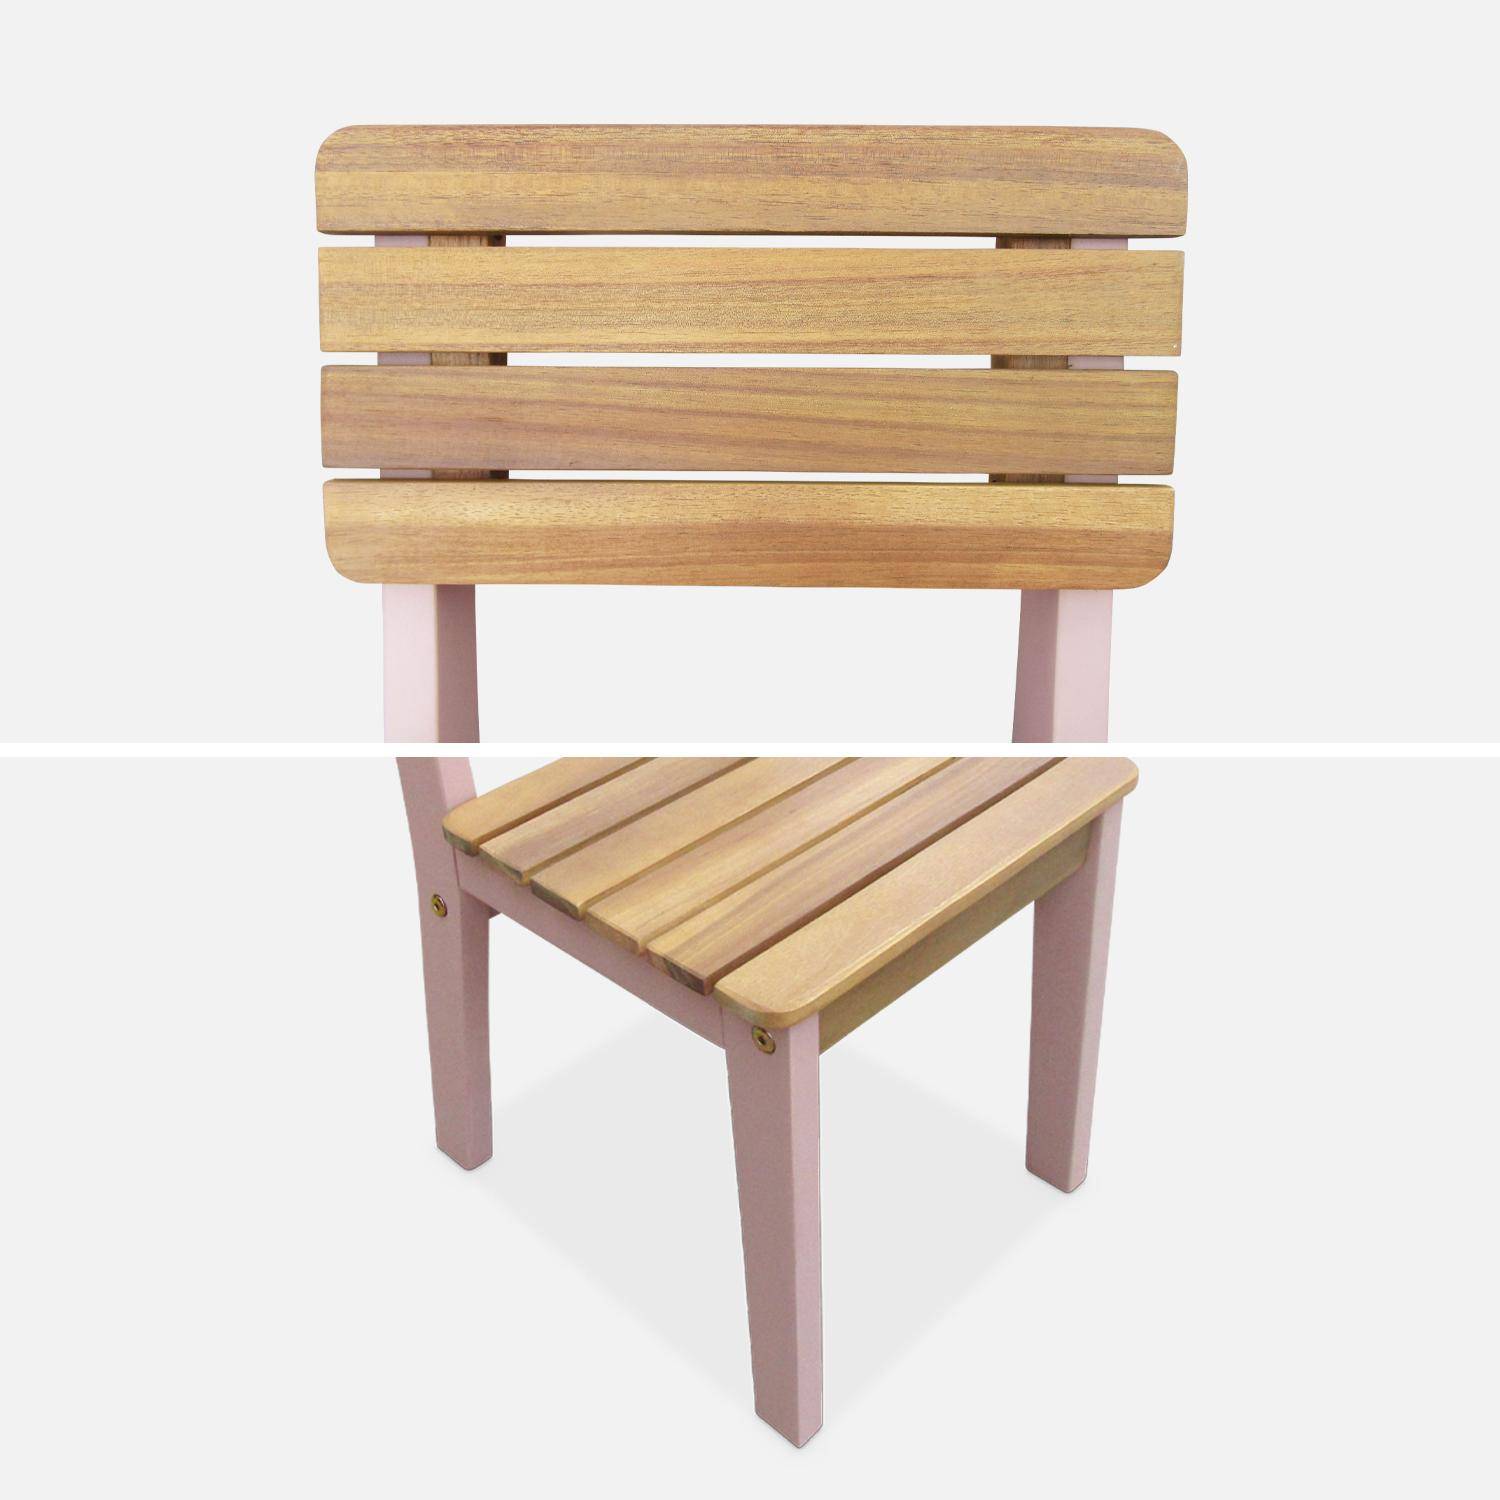 Solid Wood Chairs for Children, Indoor/Outdoor (Set of 2), pink, L29 x D31.5 x H53 cm,sweeek,Photo6